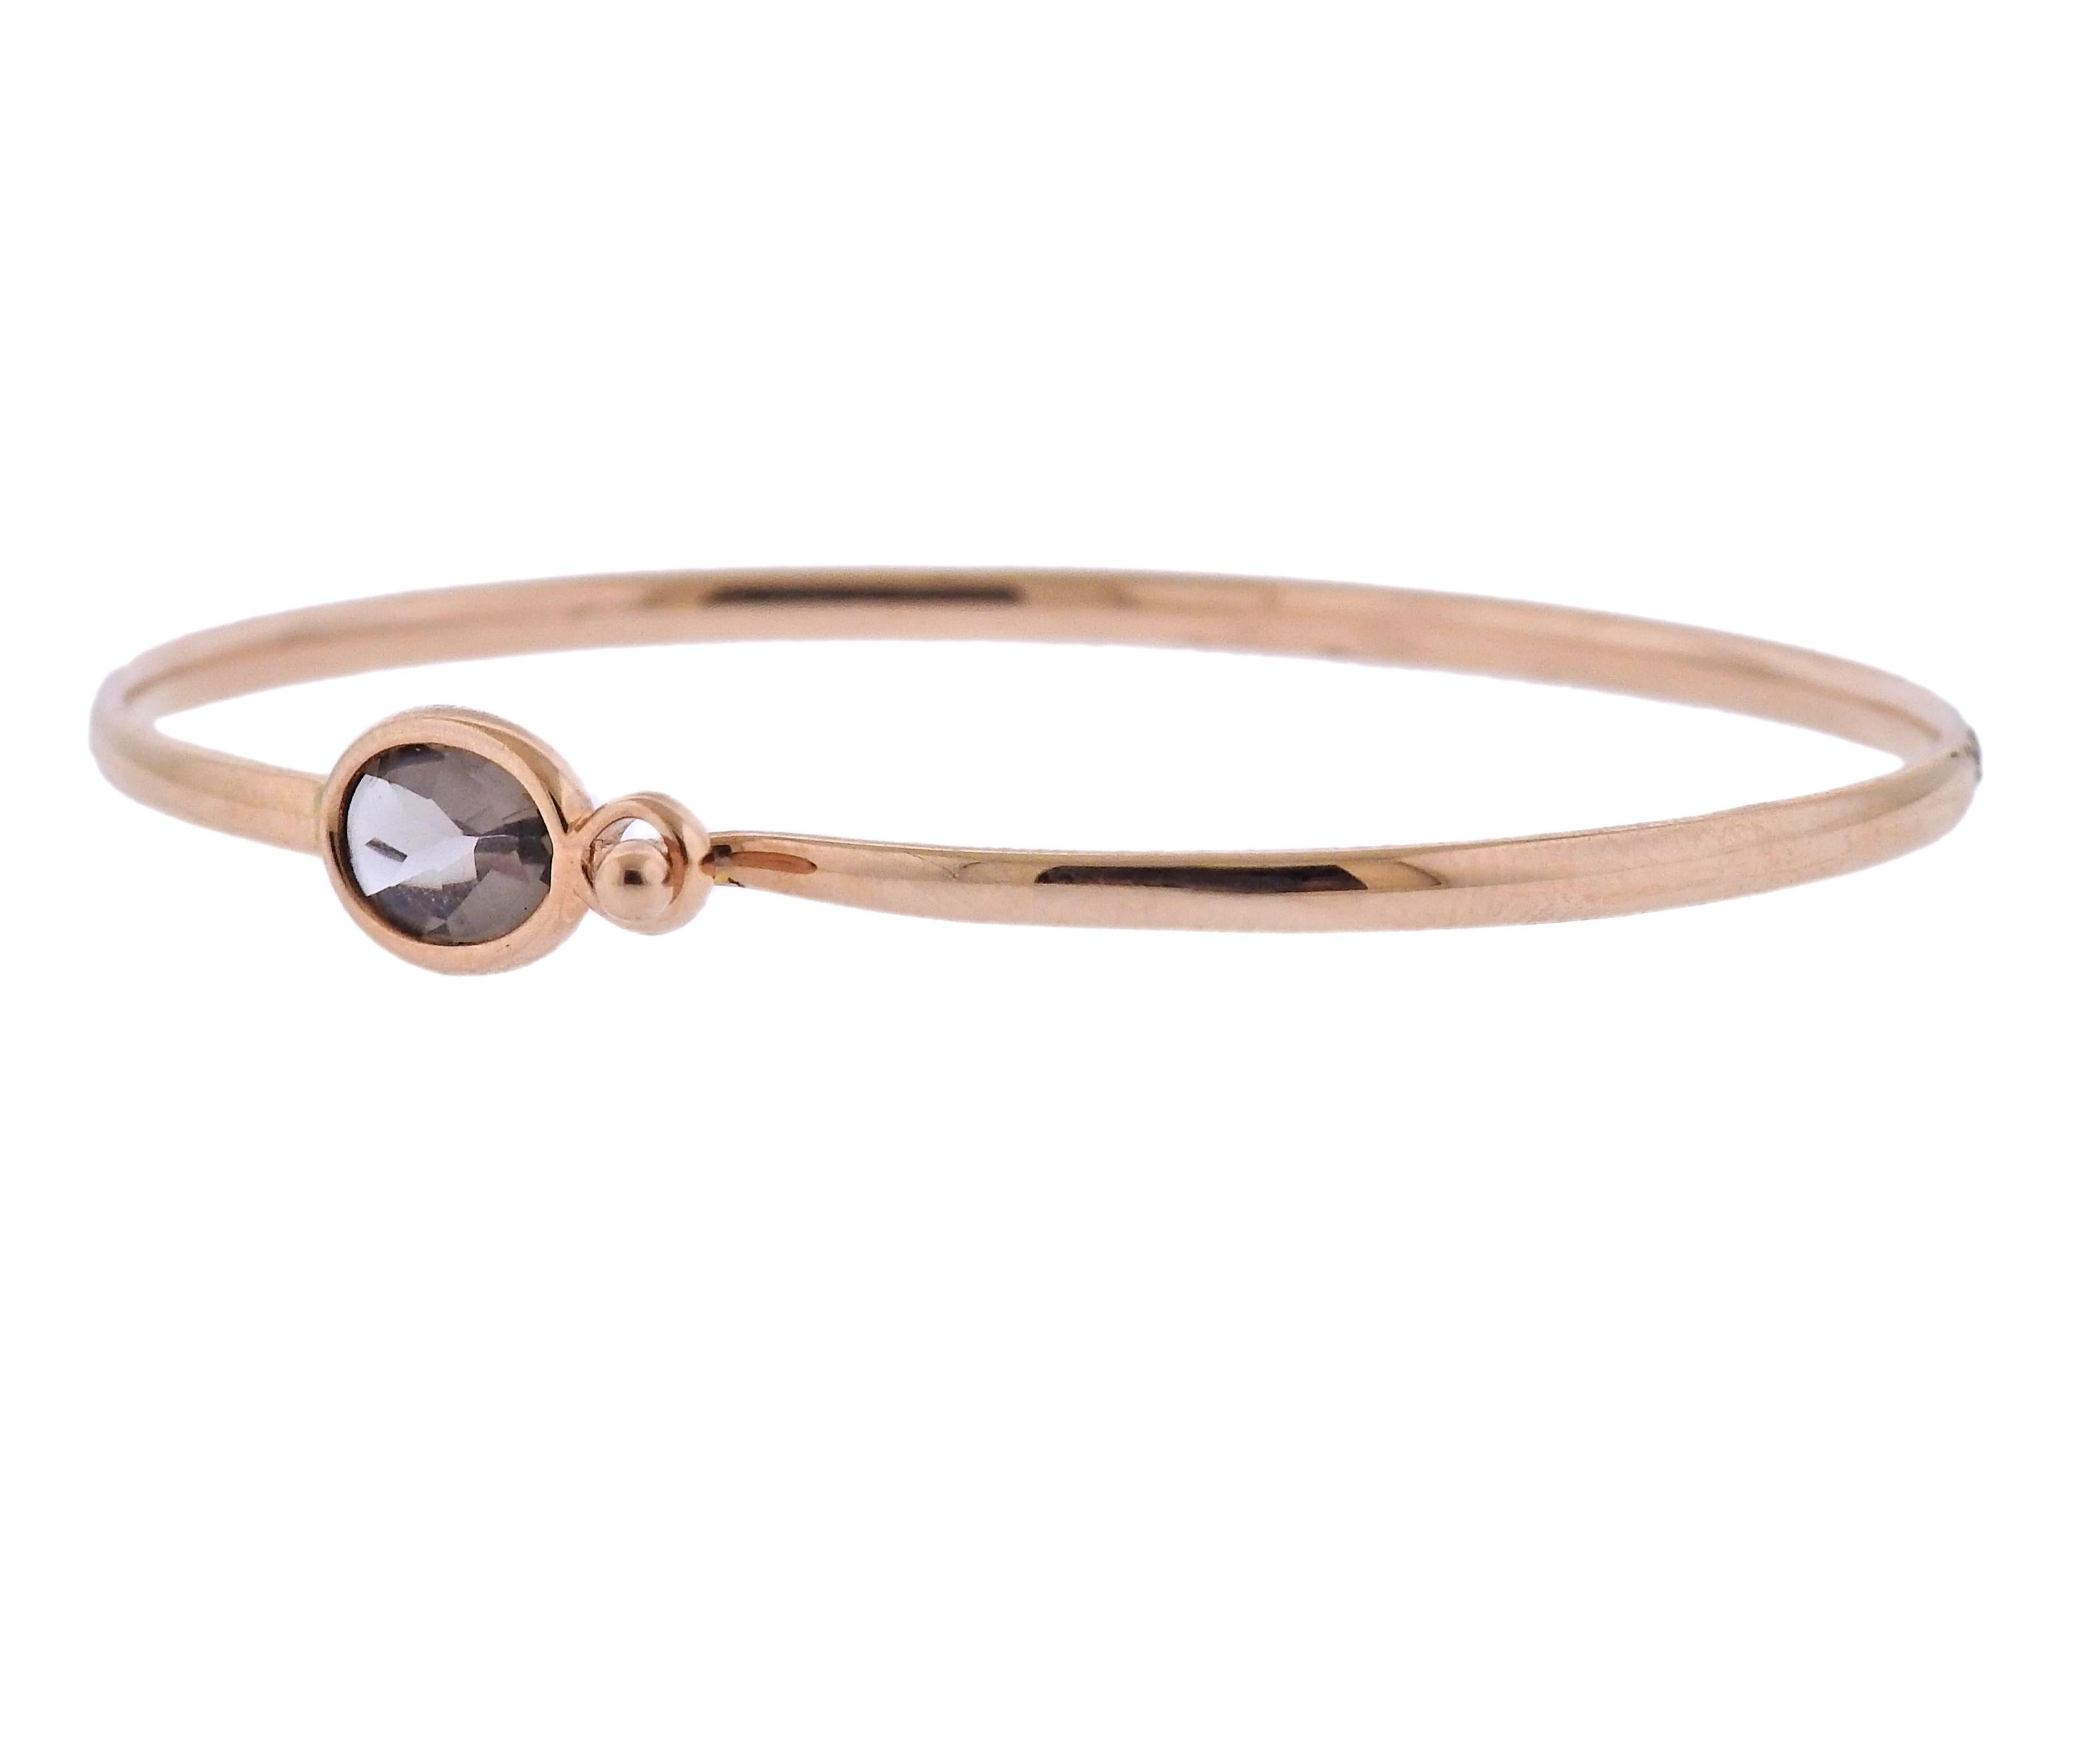 Brand new Georg Jensen 18k gold bracelet from Savannah collection with smokey quartz. Center section measures 8 x 16mm. Available in sizes S and M (will fit respectively approx. 6.5